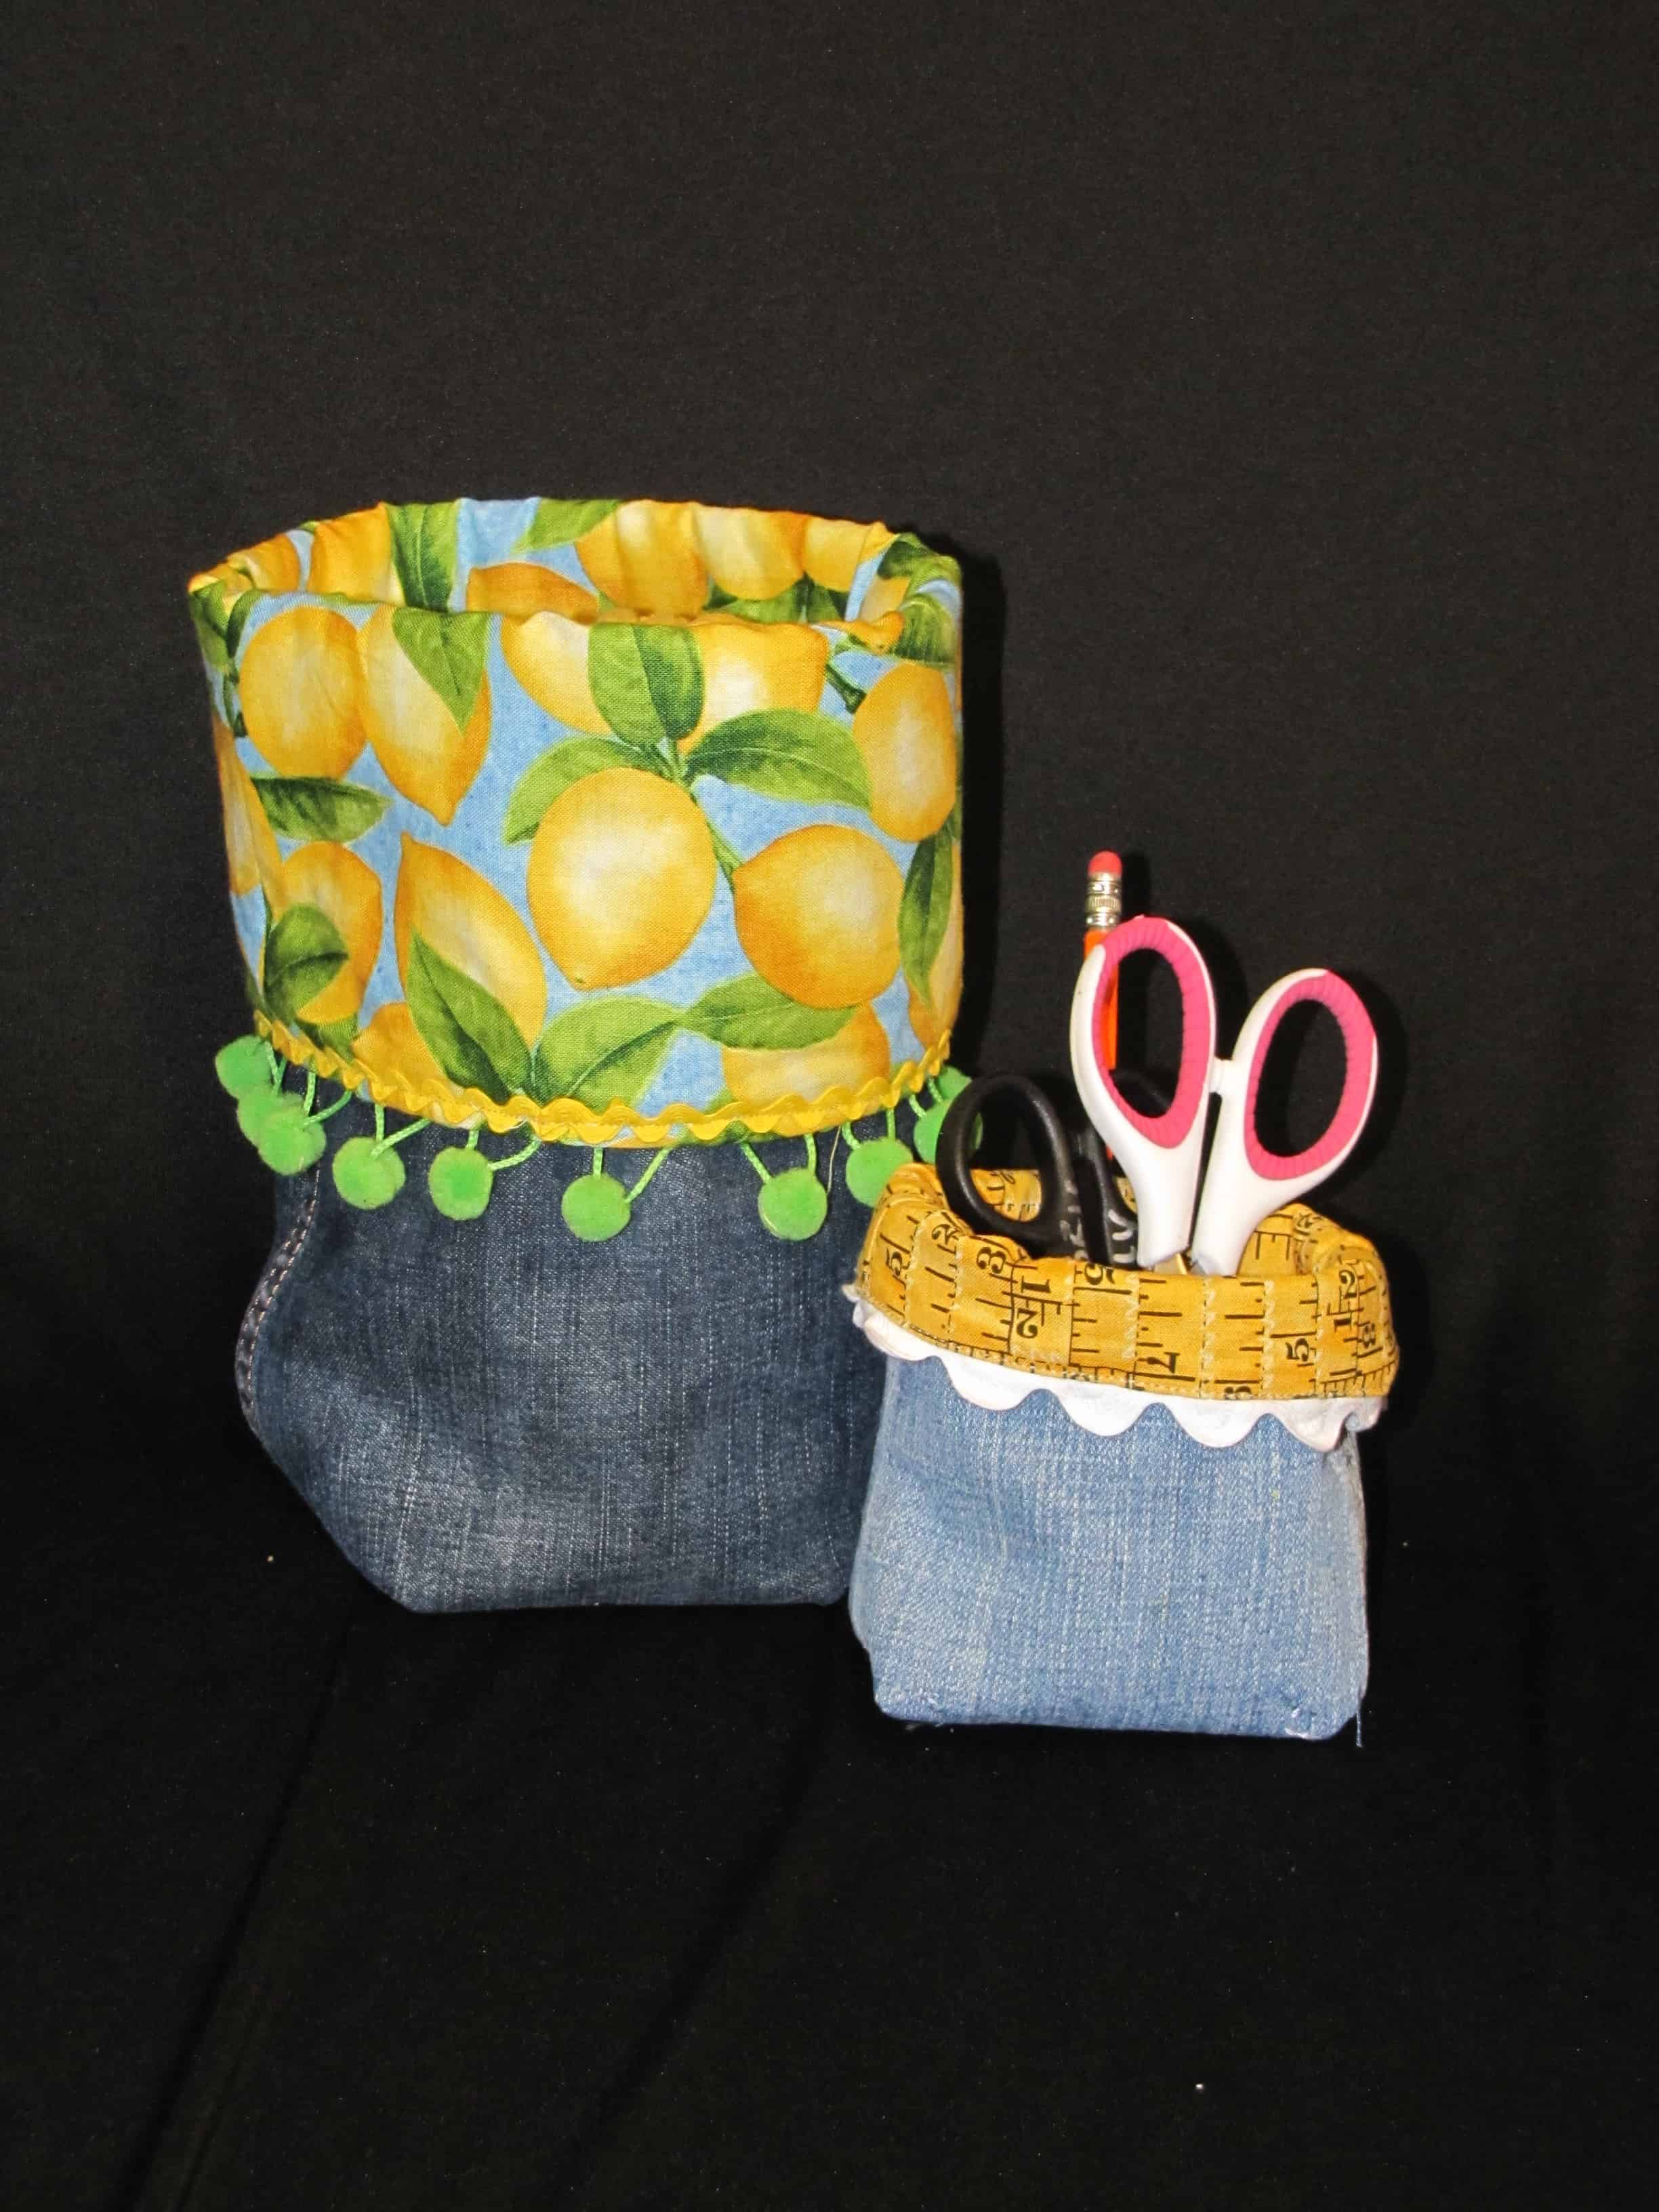 Denim buckets made from jeans legs